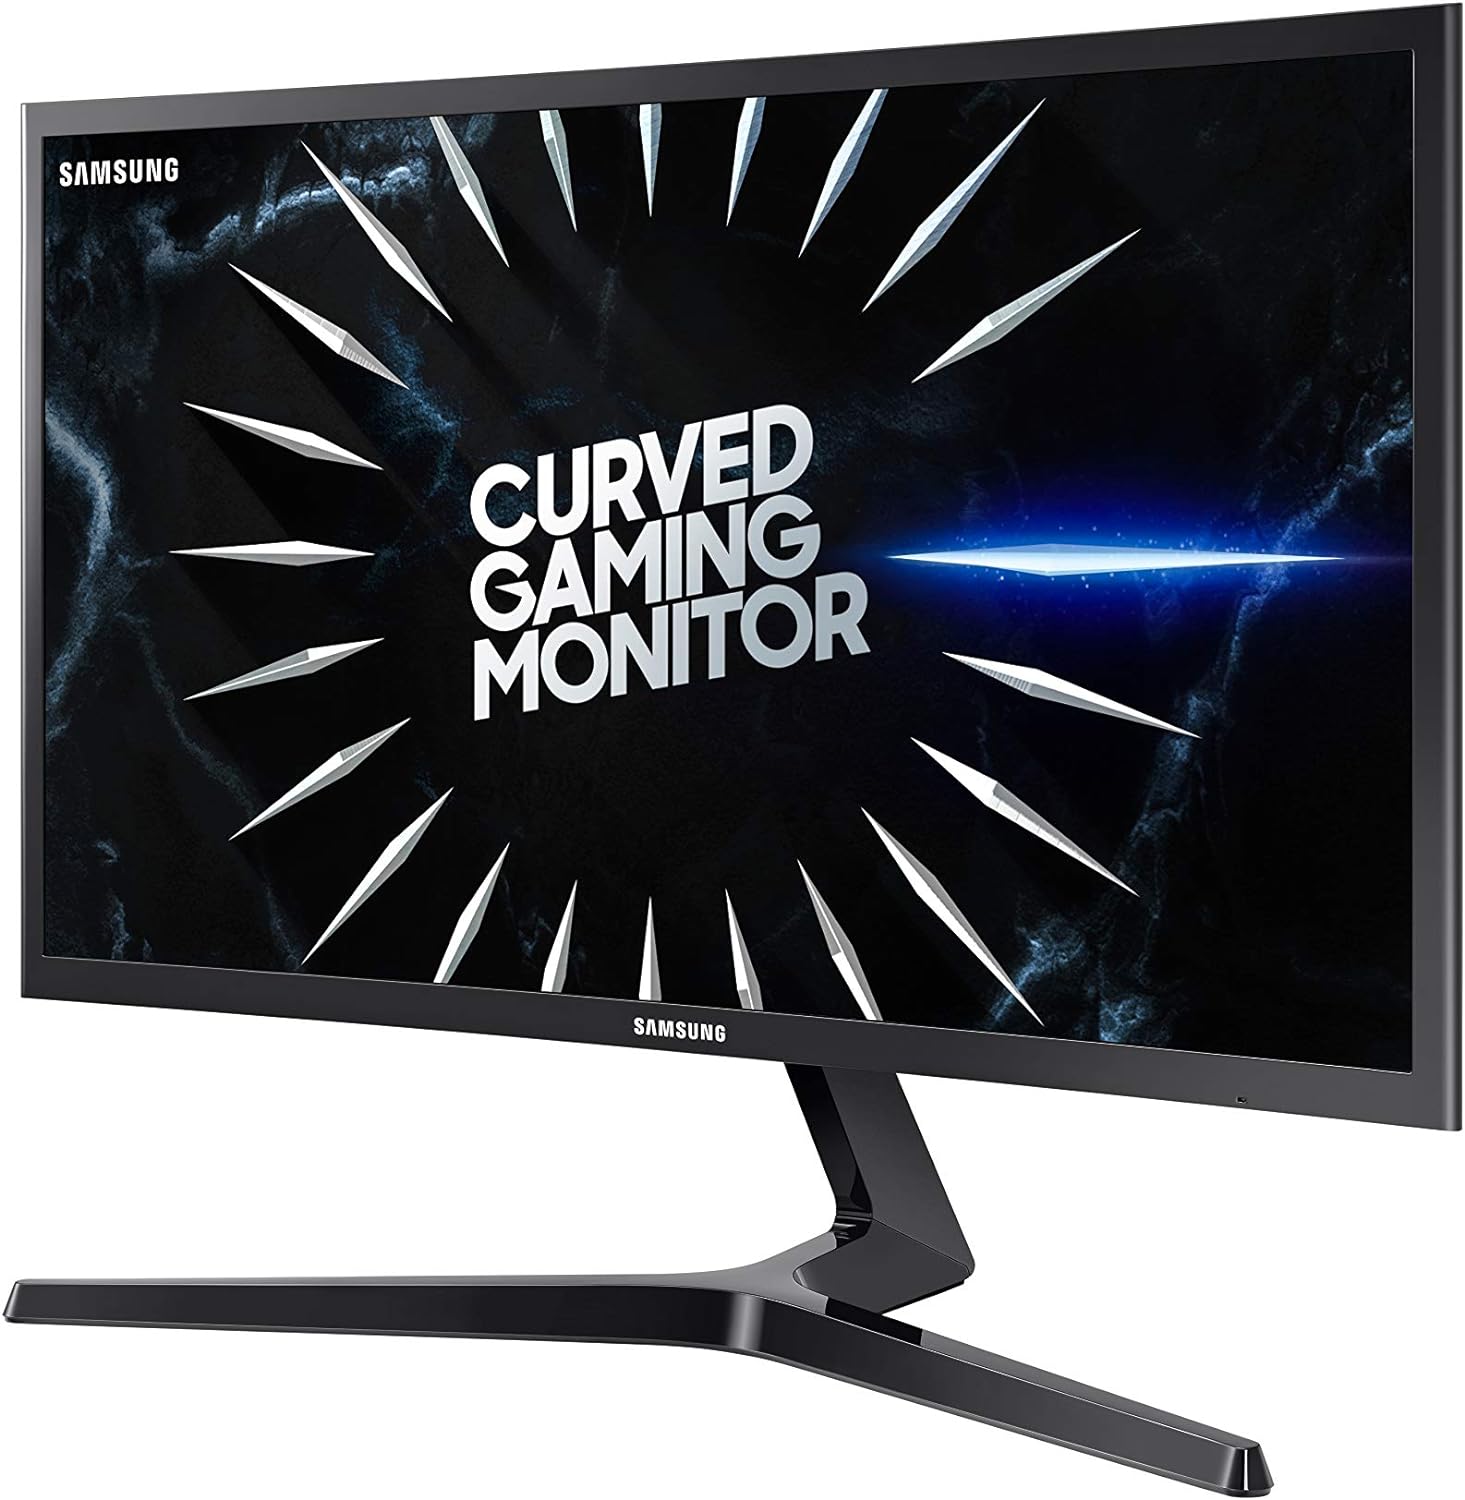 SAMSUNG 24-Inch CRG5 144Hz Curved Gaming Monitor (